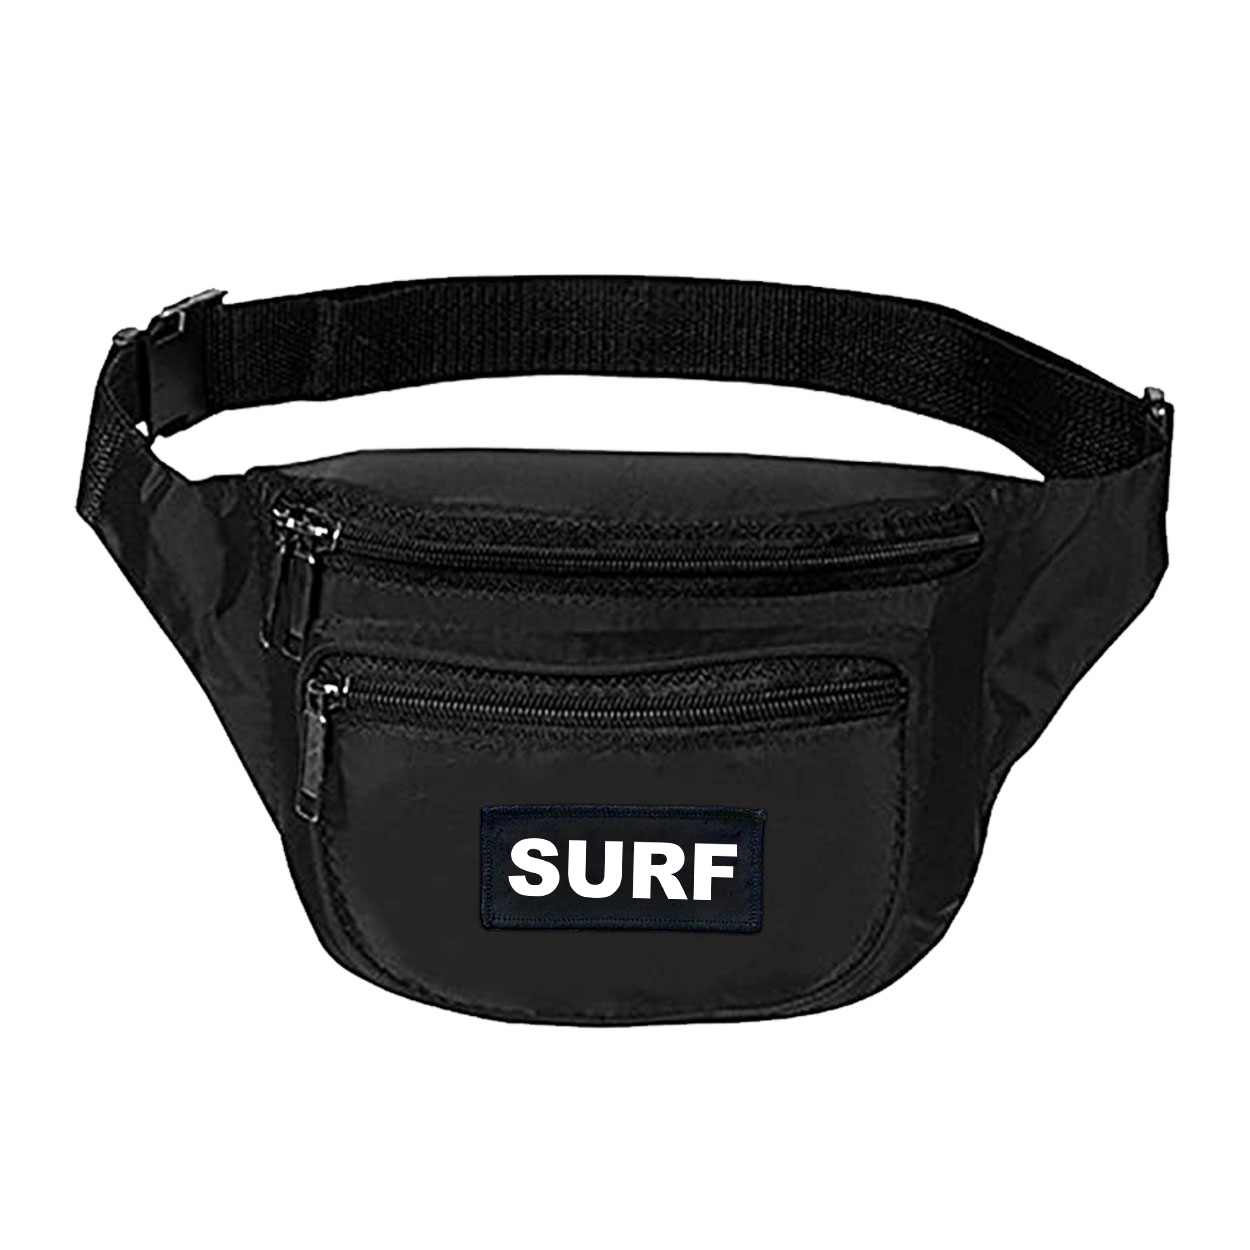 Surf Brand Logo Night Out Woven Patch Fanny Pack Black